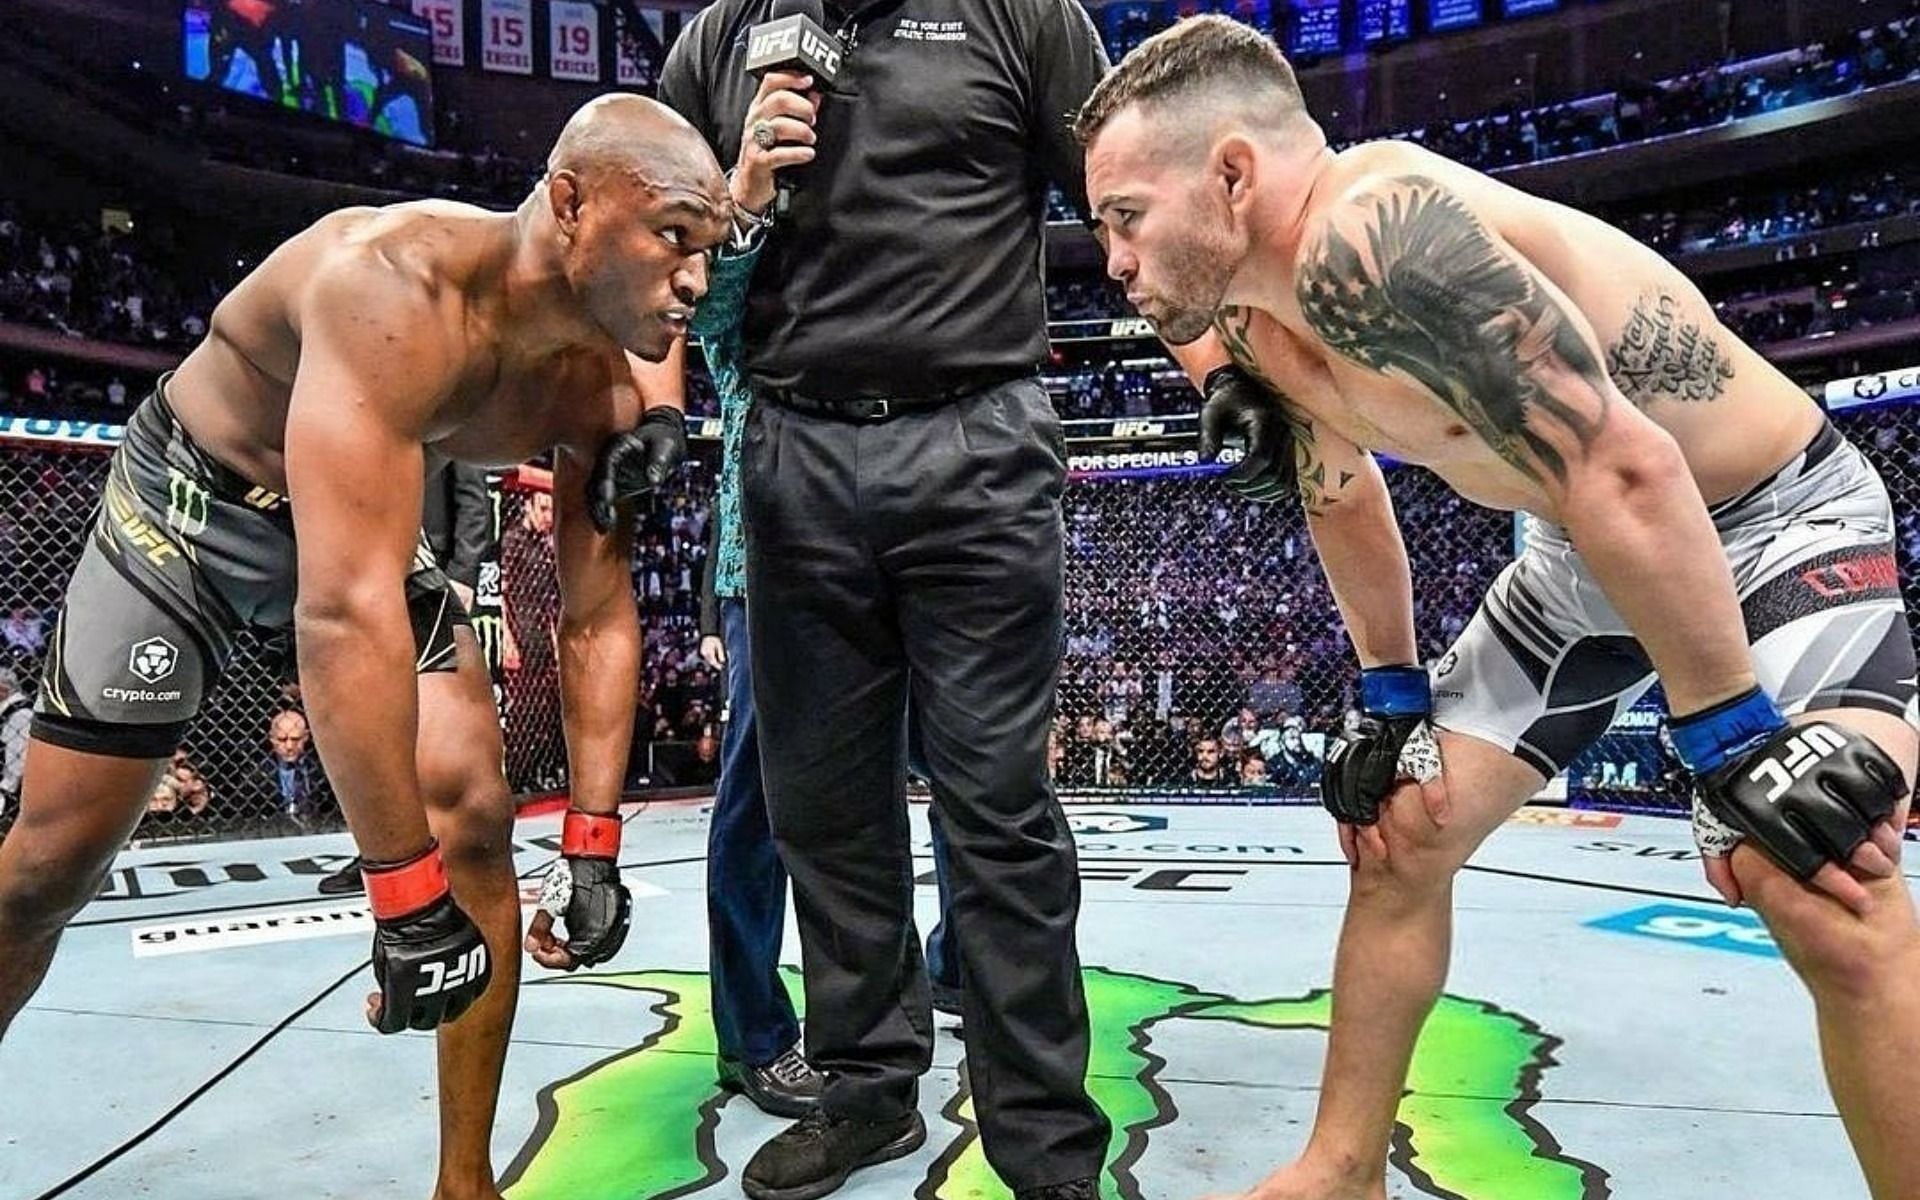 UFC welterweight superstars Kamaru Usman (left) and Colby Covington (right) [Image Credit: @colbycovmma on Instagram]